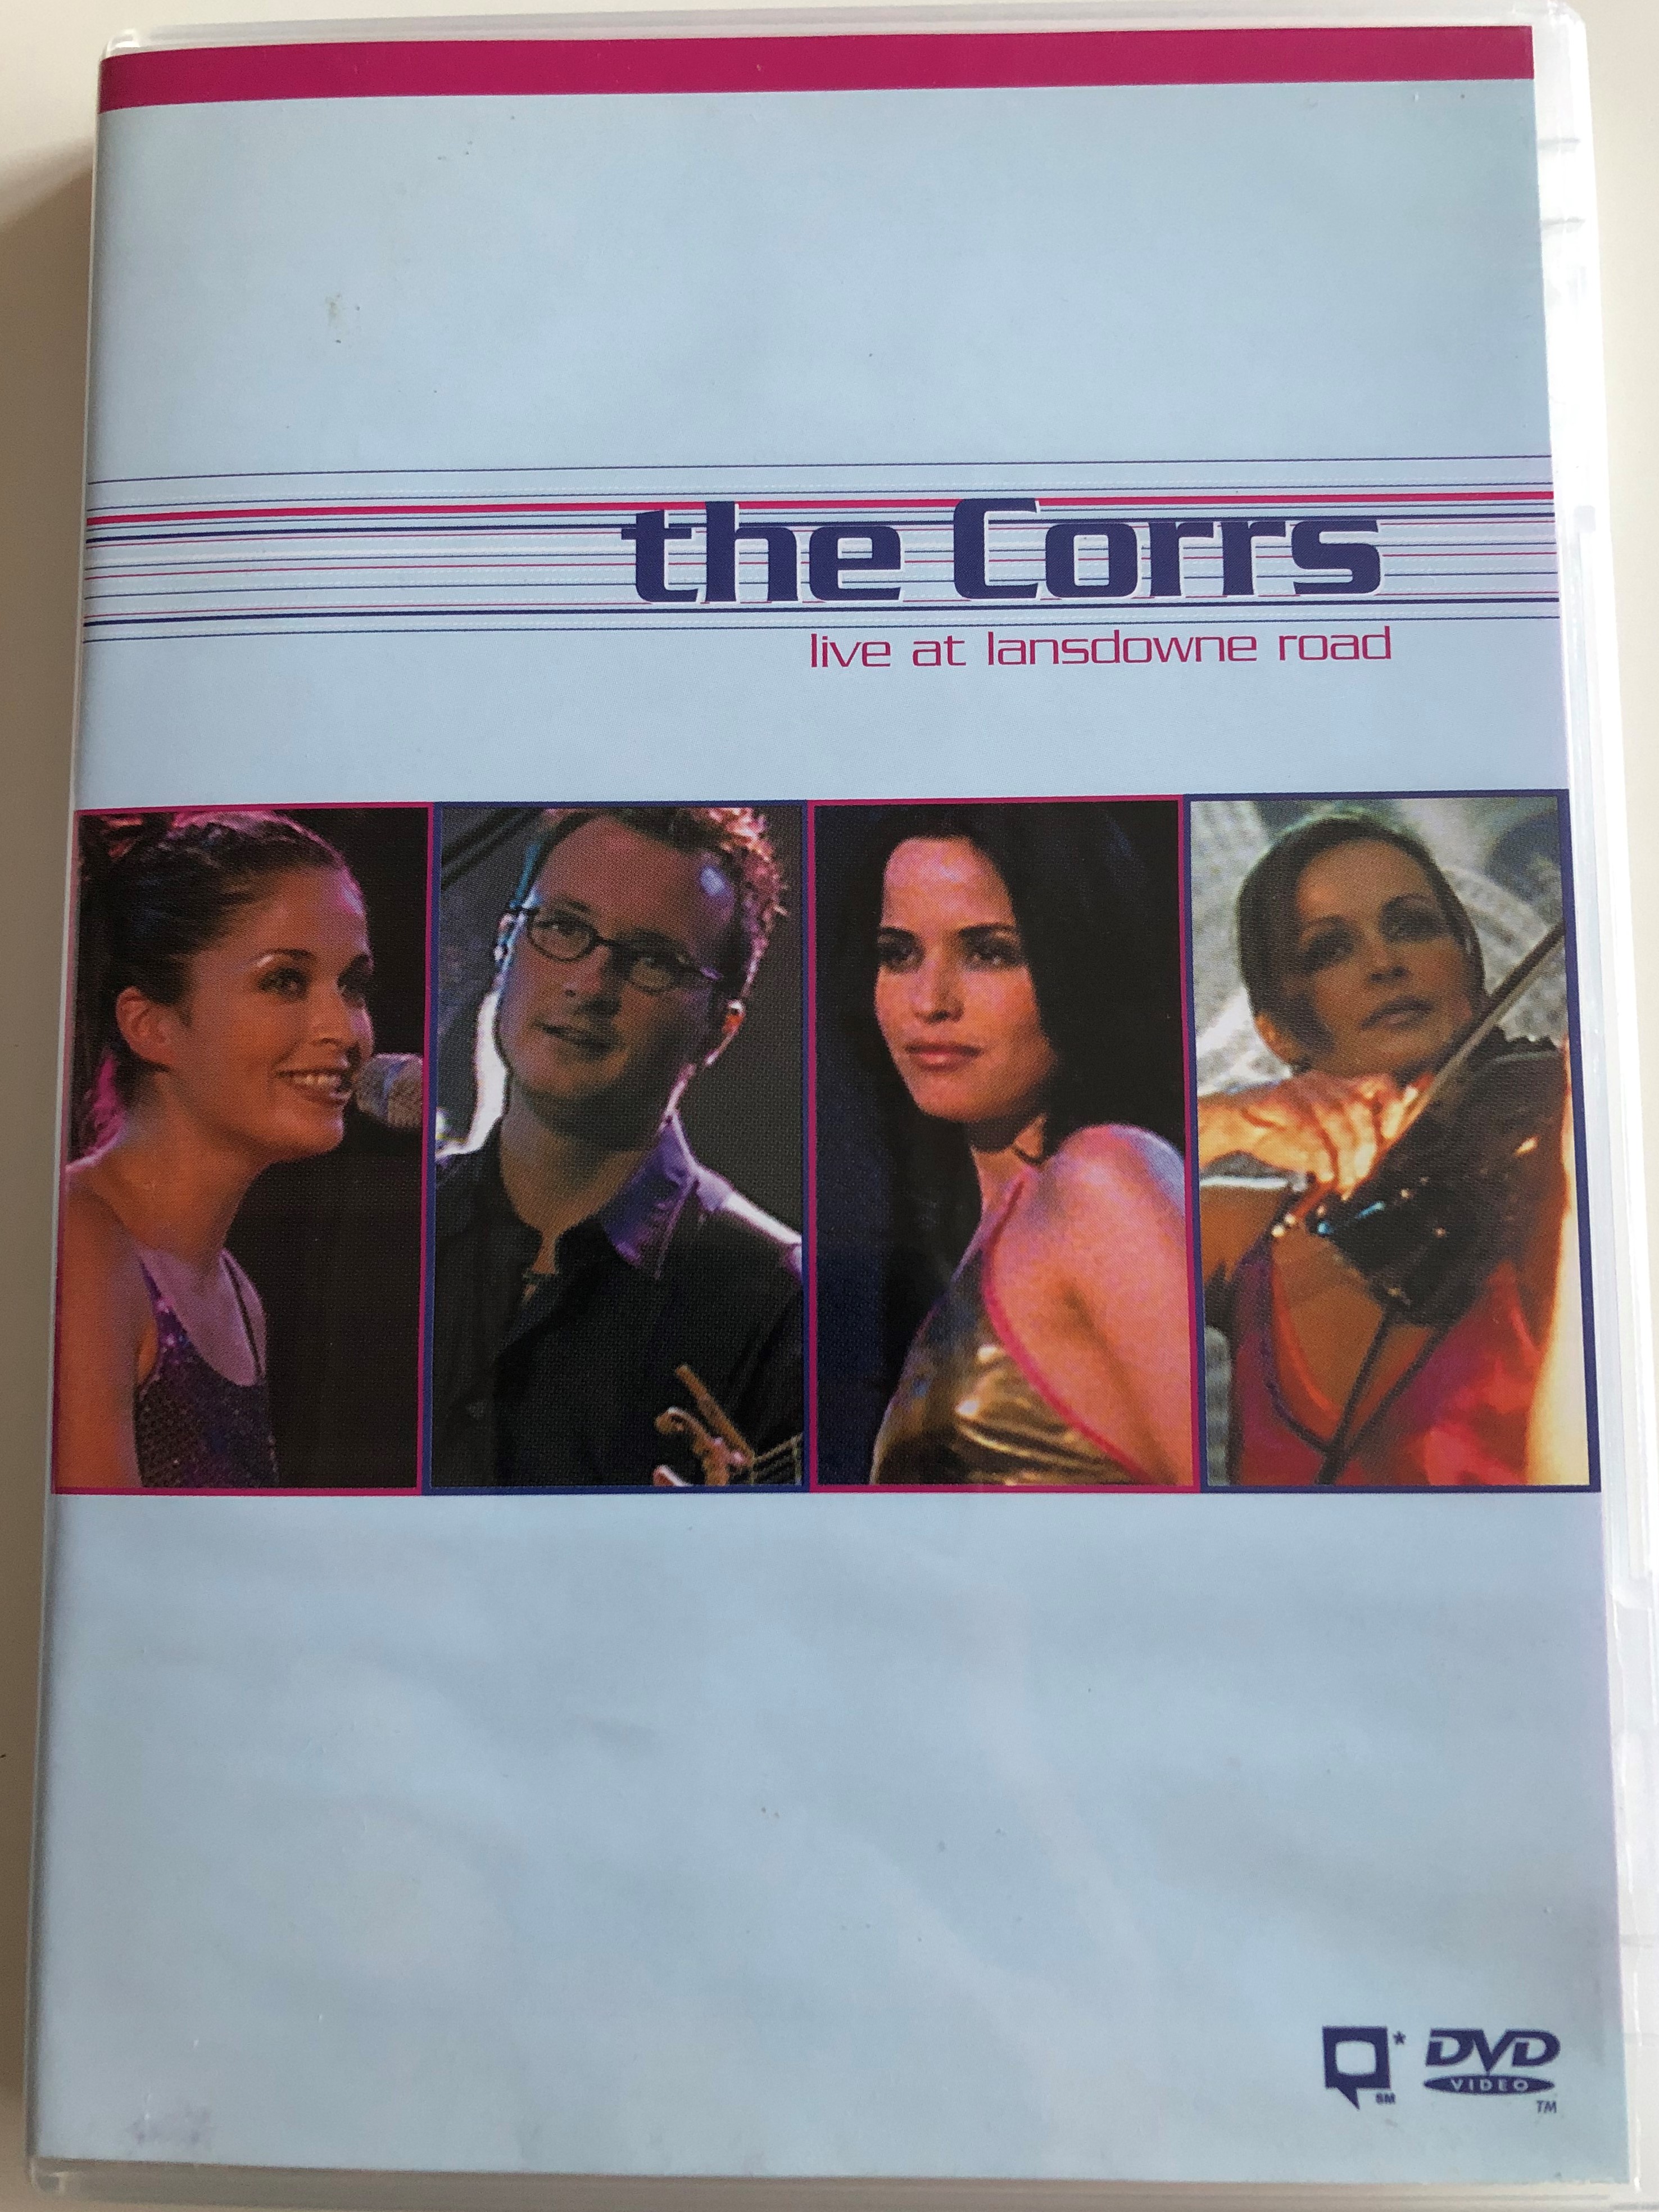 the-corrs-dvd-2000-live-at-the-lansdowne-road-1.jpg